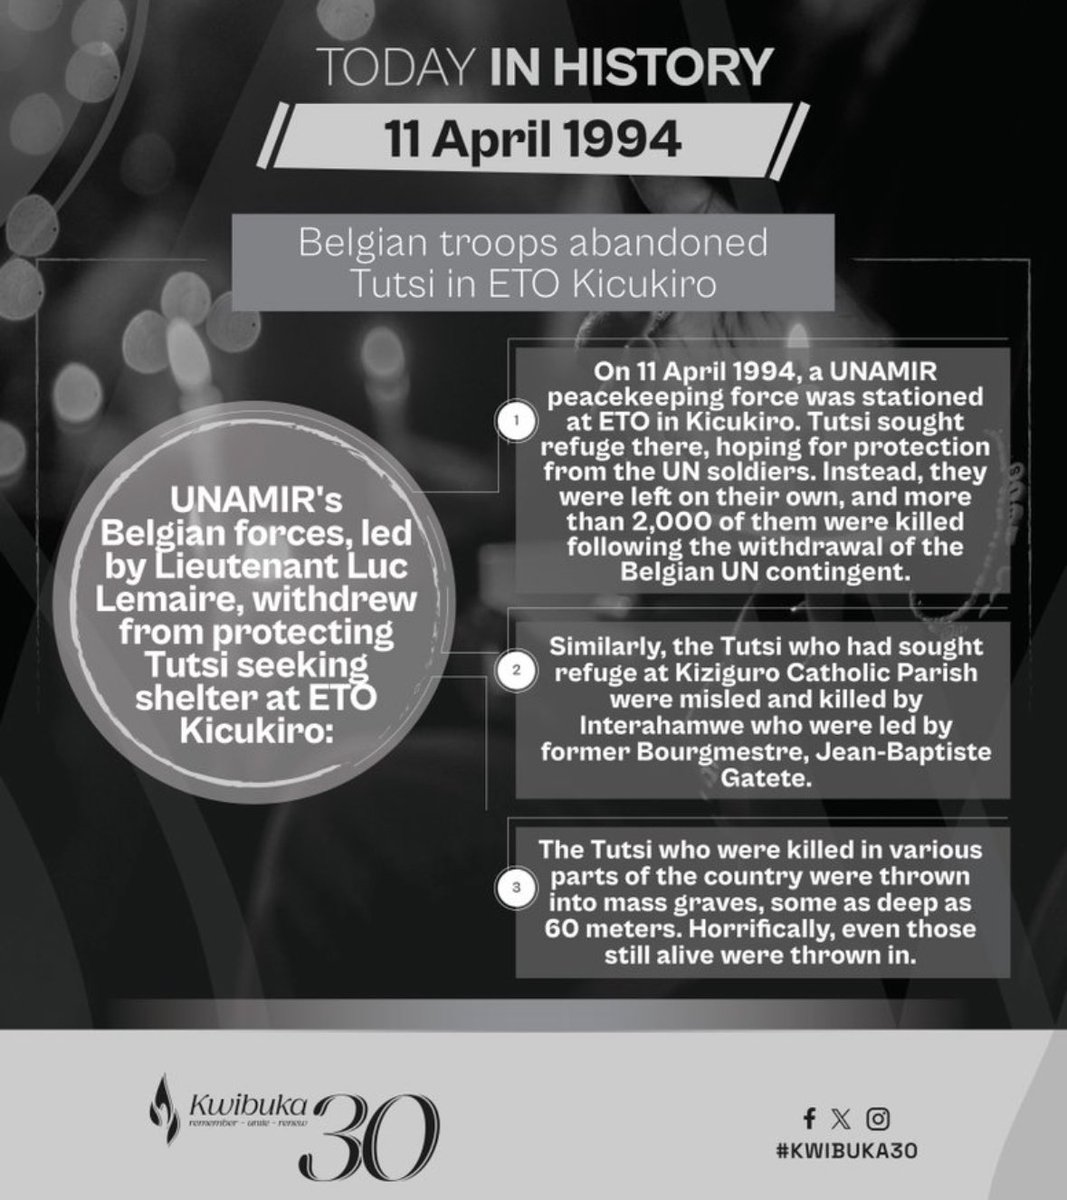 📍TODAY IN HISTORY On 11 April 1994, the UNAMIR contingent abandoned Tutsi who had sought refuge in ETO Kicukiro, leading to a massacre of more than 2,000 Tutsi. These massacres also continued in other prefectures including Byumba, Cyangugu and Kibungo. Learn more:…